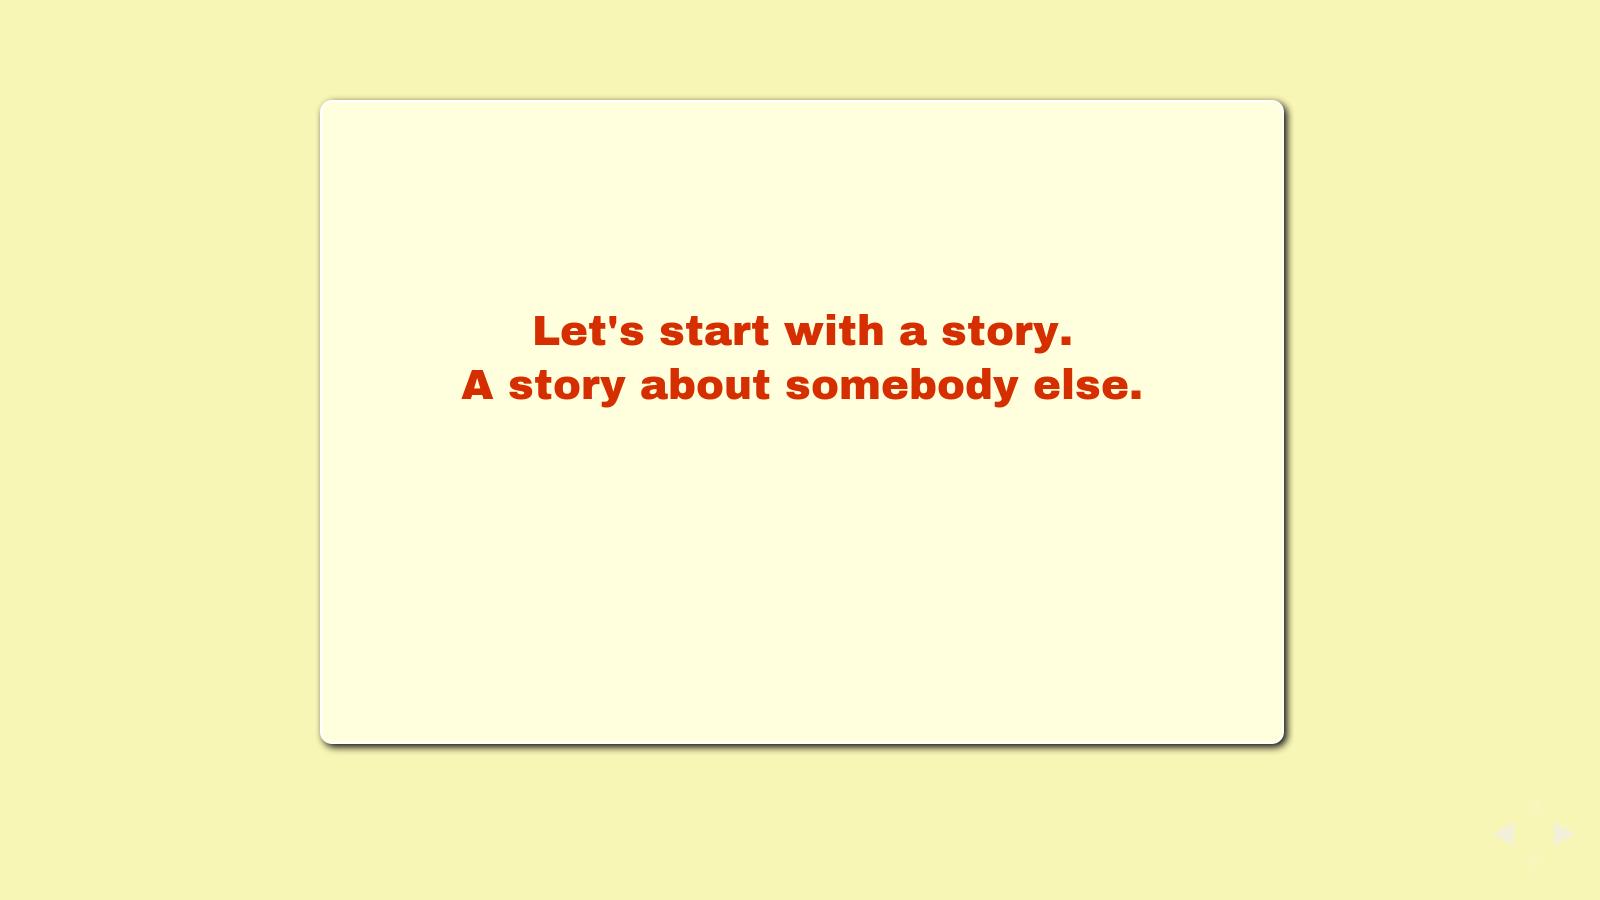 Slide: Let's start with a story